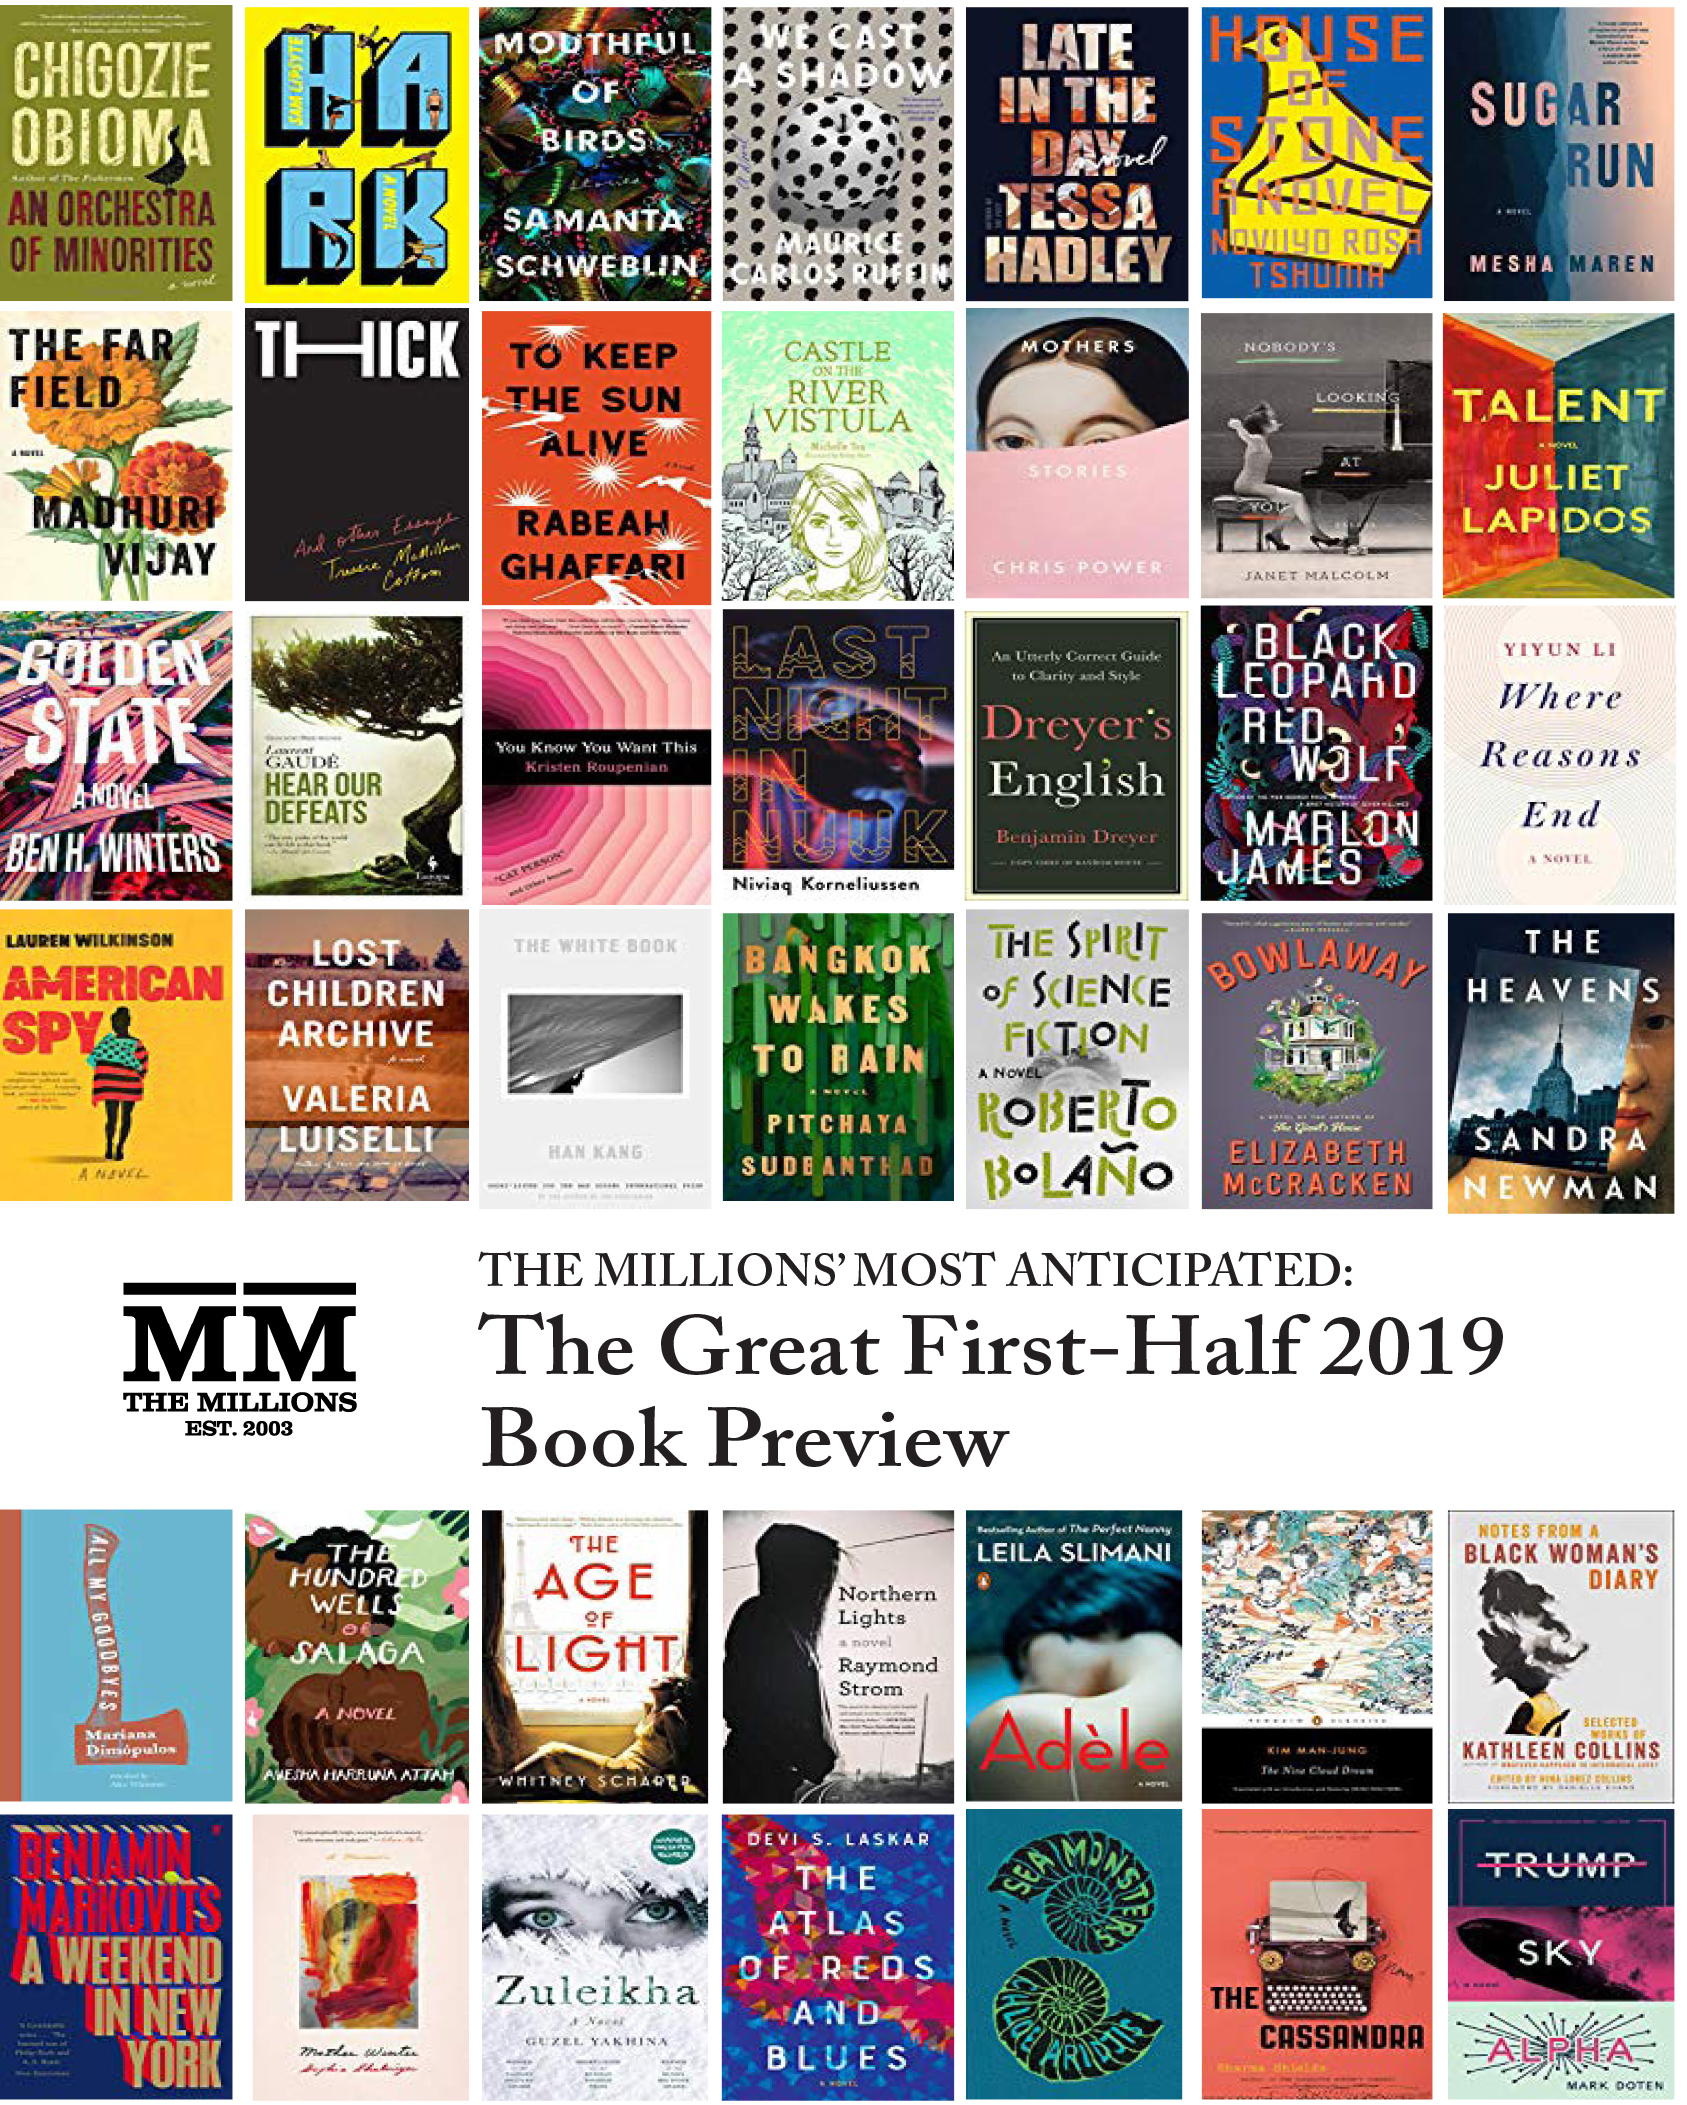 Most Anticipated The Great First-Half 2019 Book Preview photo